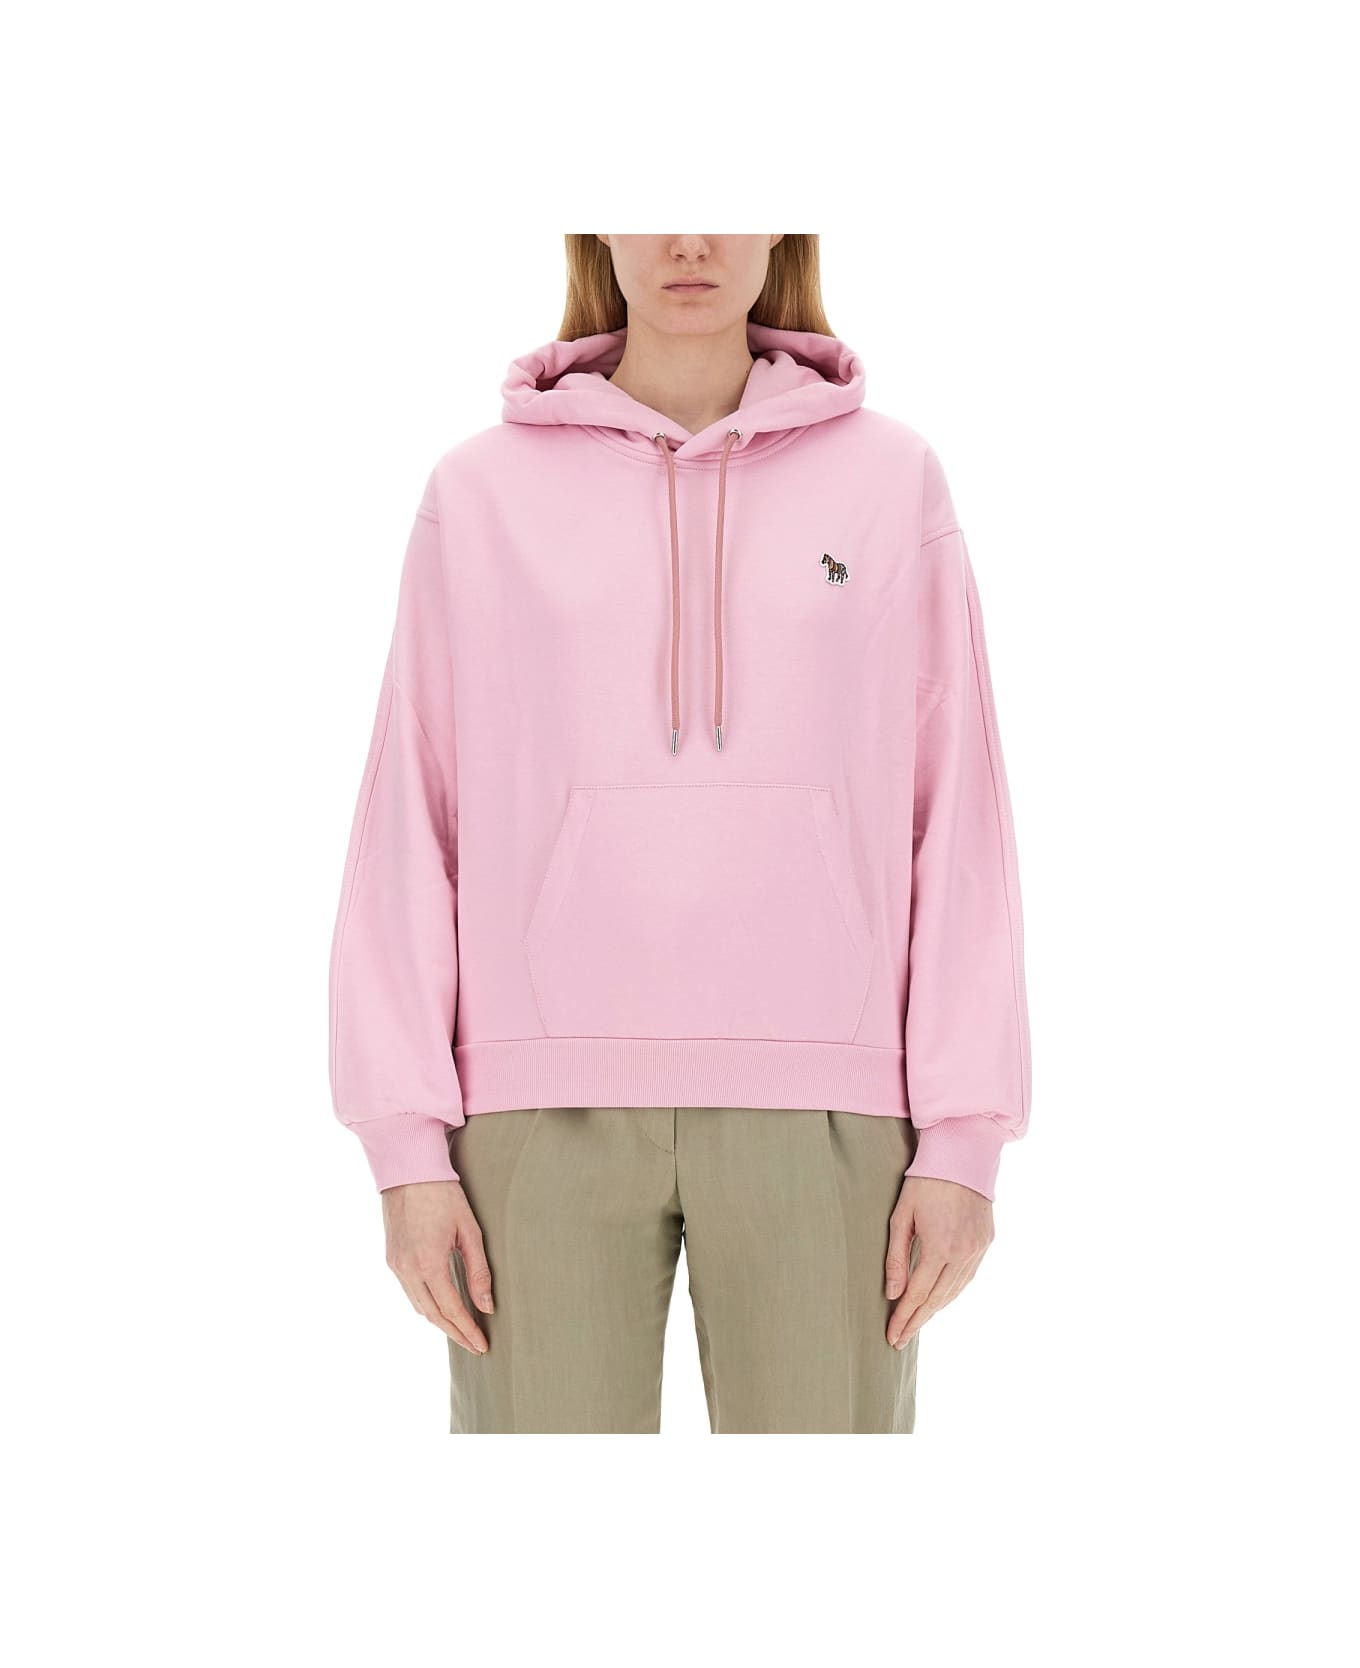 PS by Paul Smith Sweatshirt With Logo - PINK